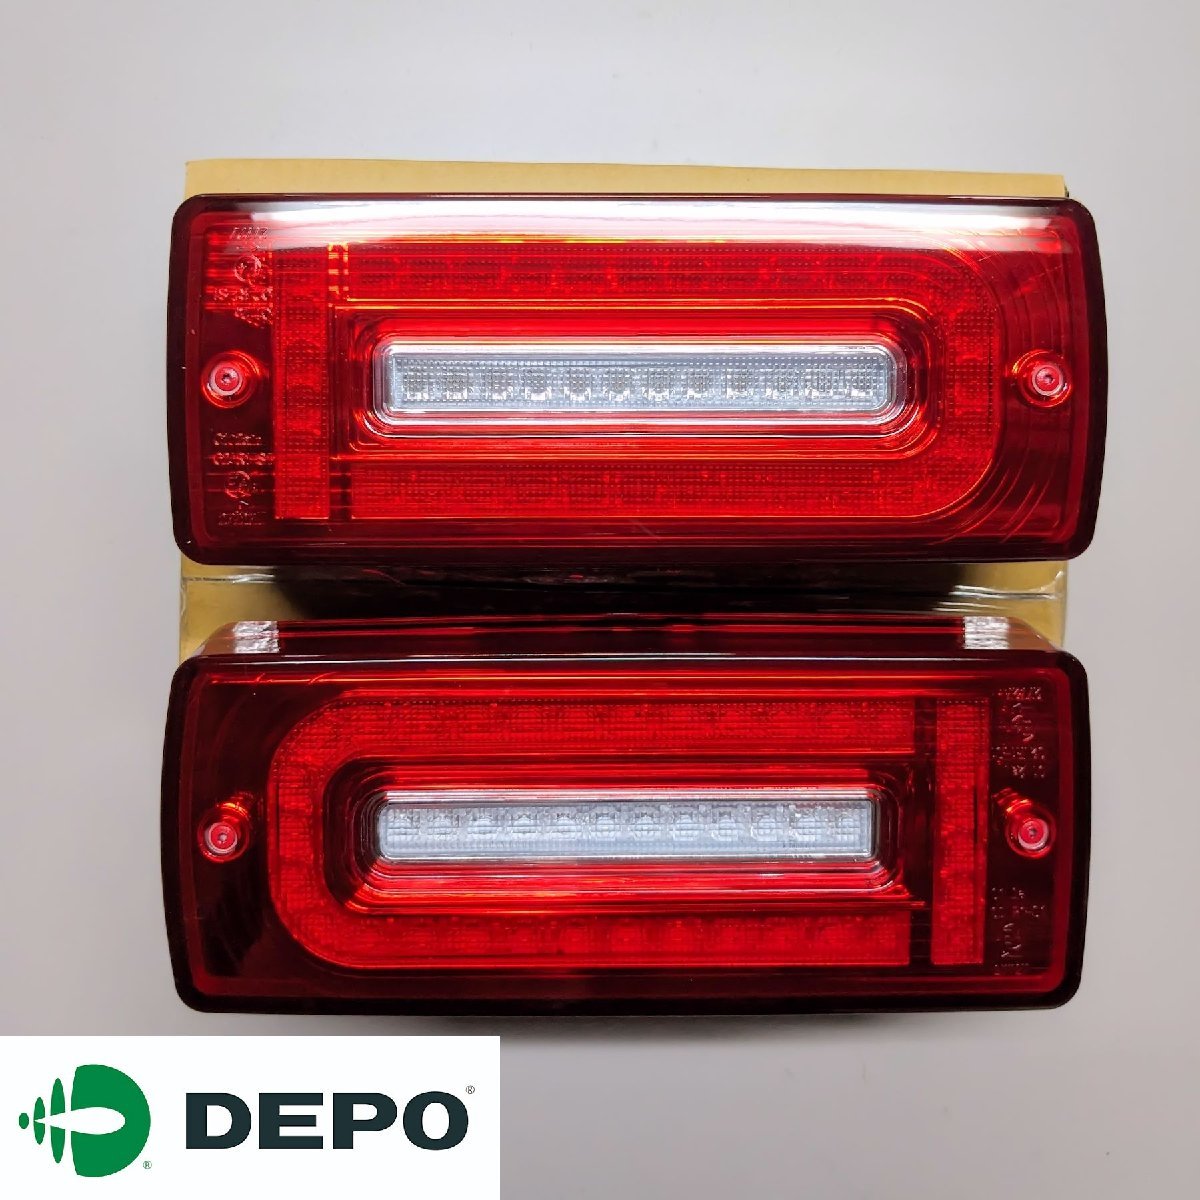 DEPO Benz G Class W463 for latter term present look W463A specification tail lamp BENZ gelaende depot light lens new goods left right set 